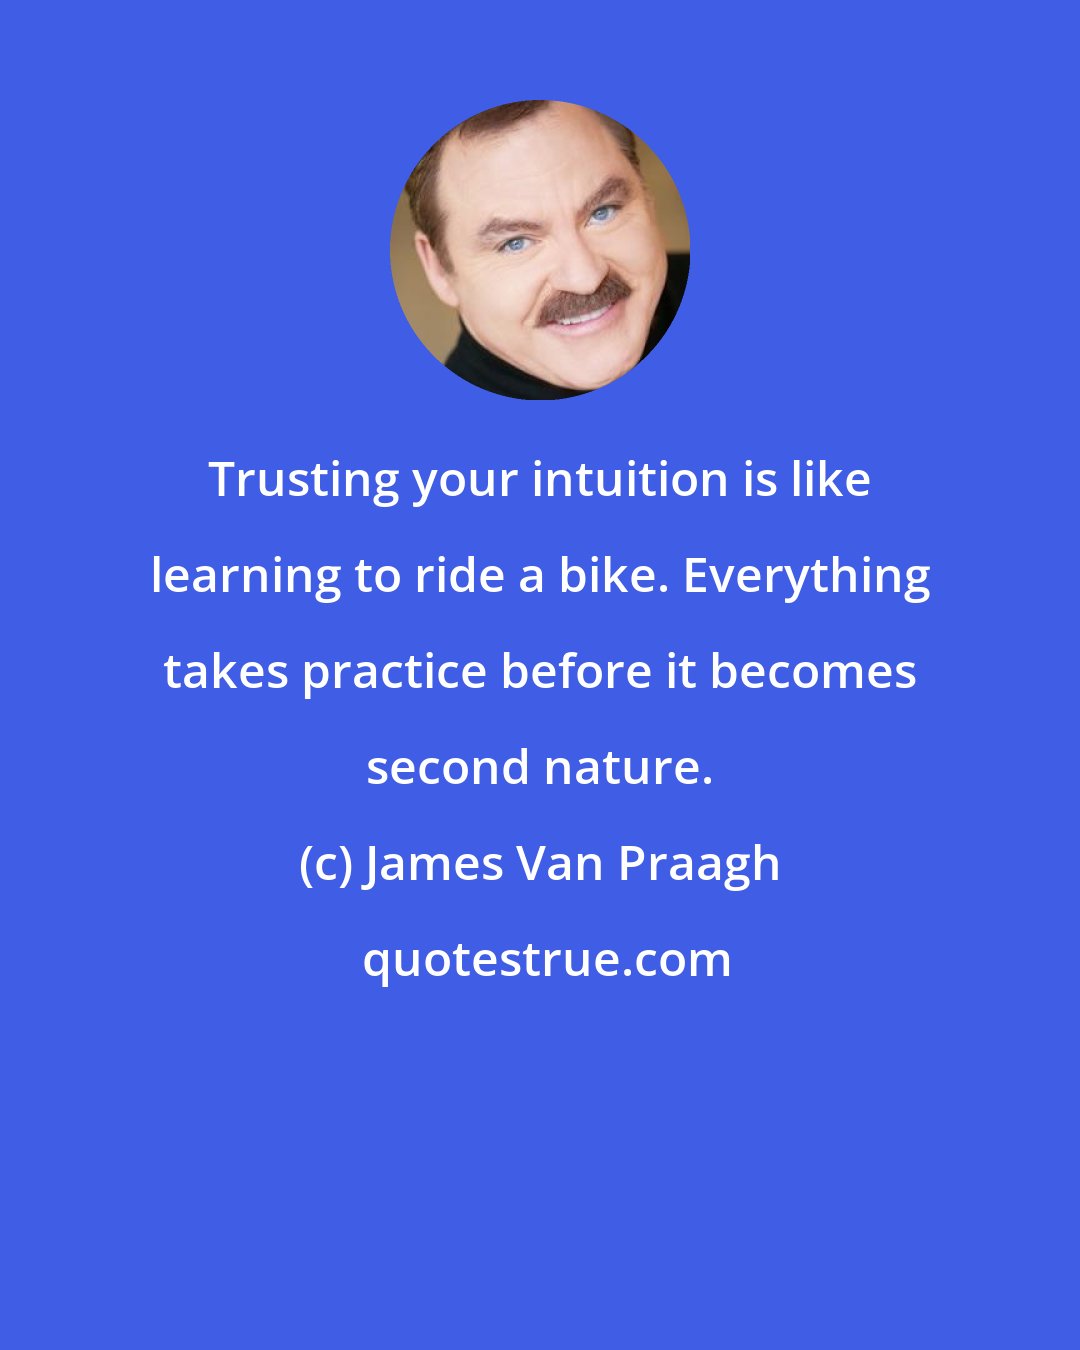 James Van Praagh: Trusting your intuition is like learning to ride a bike. Everything takes practice before it becomes second nature.